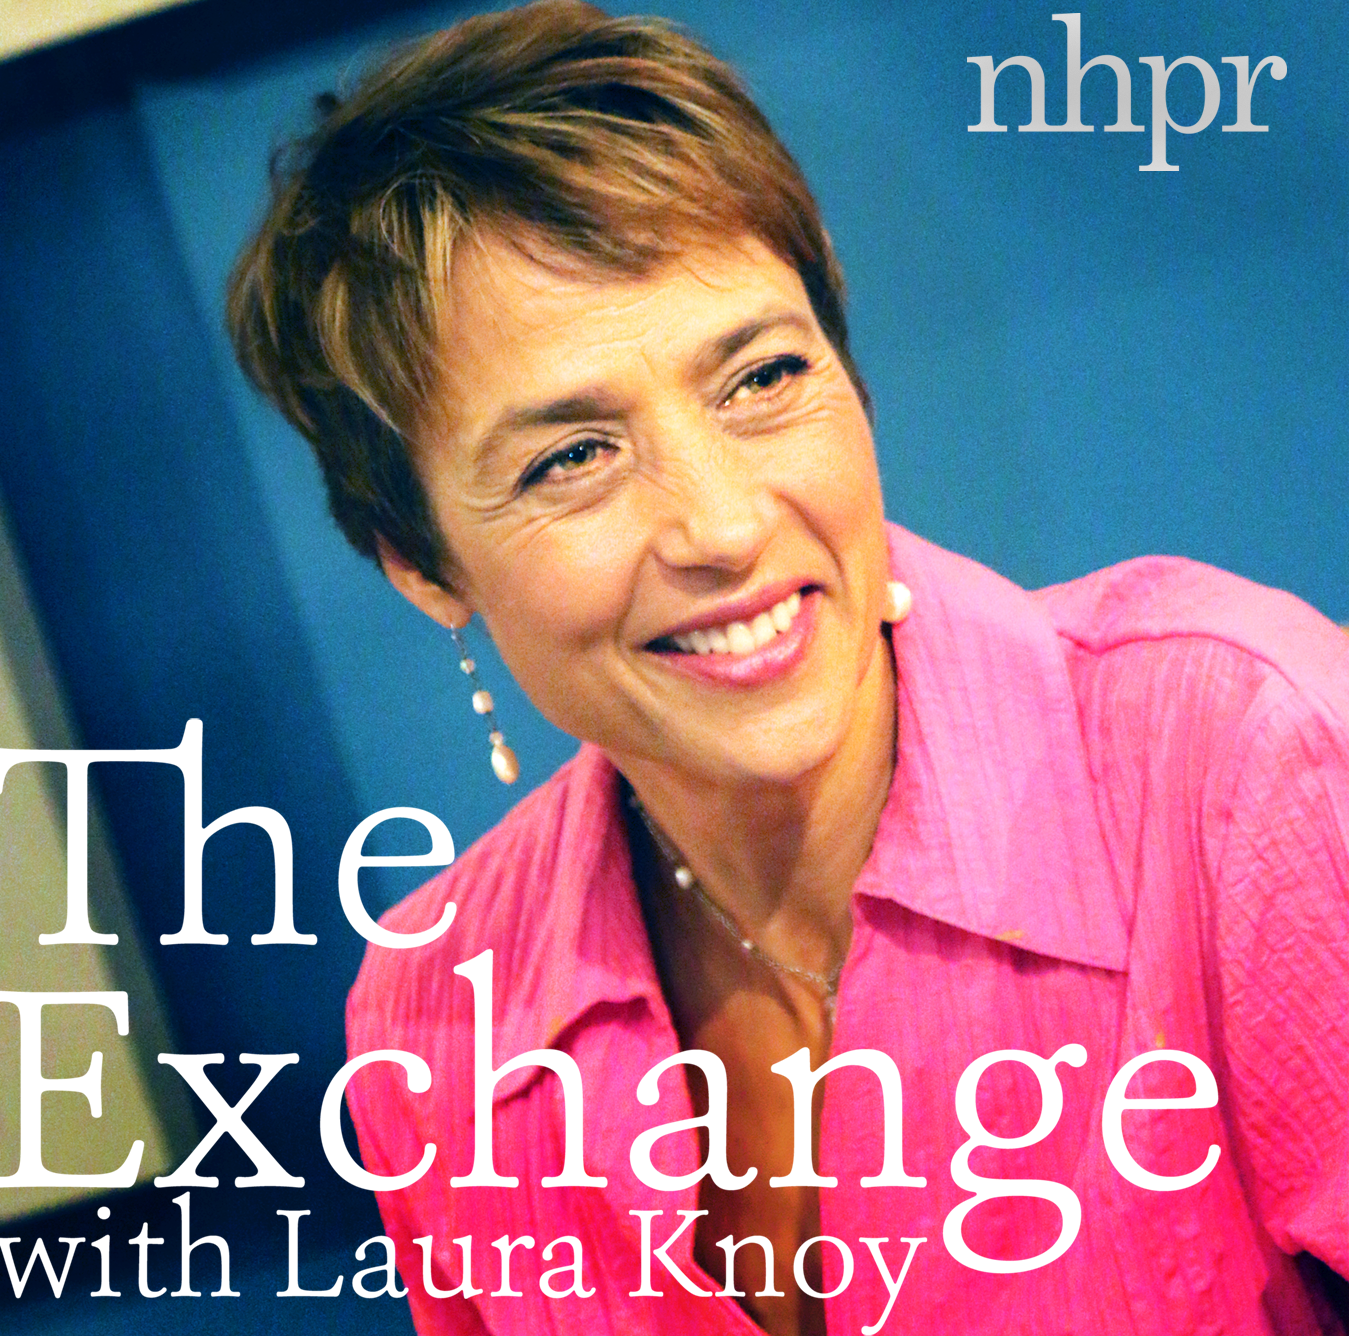 NHPR to End The Exchange After 25 Years